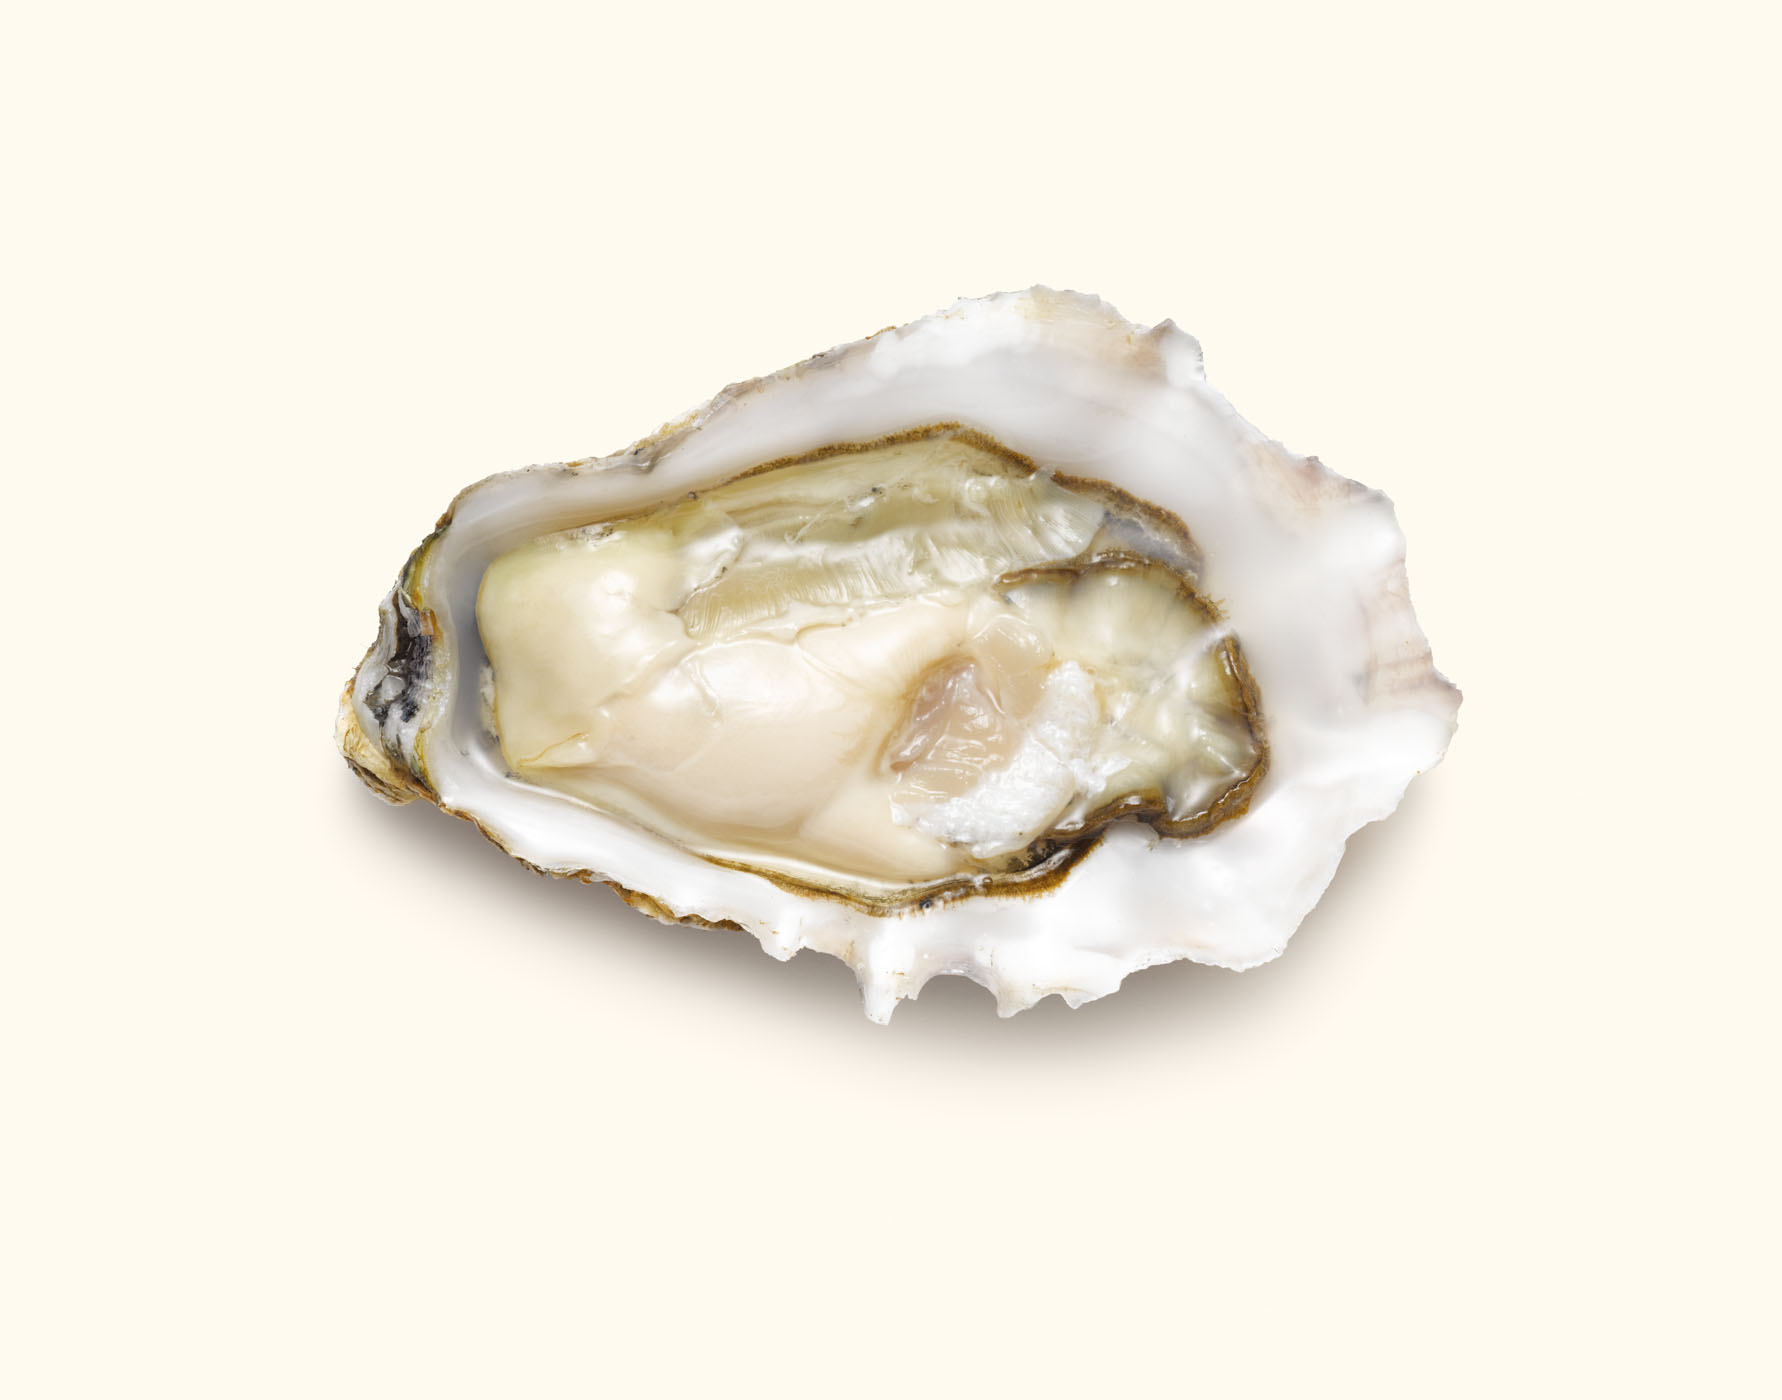 Oysters photograph  by Alexander Kent London based still life and product photographer.